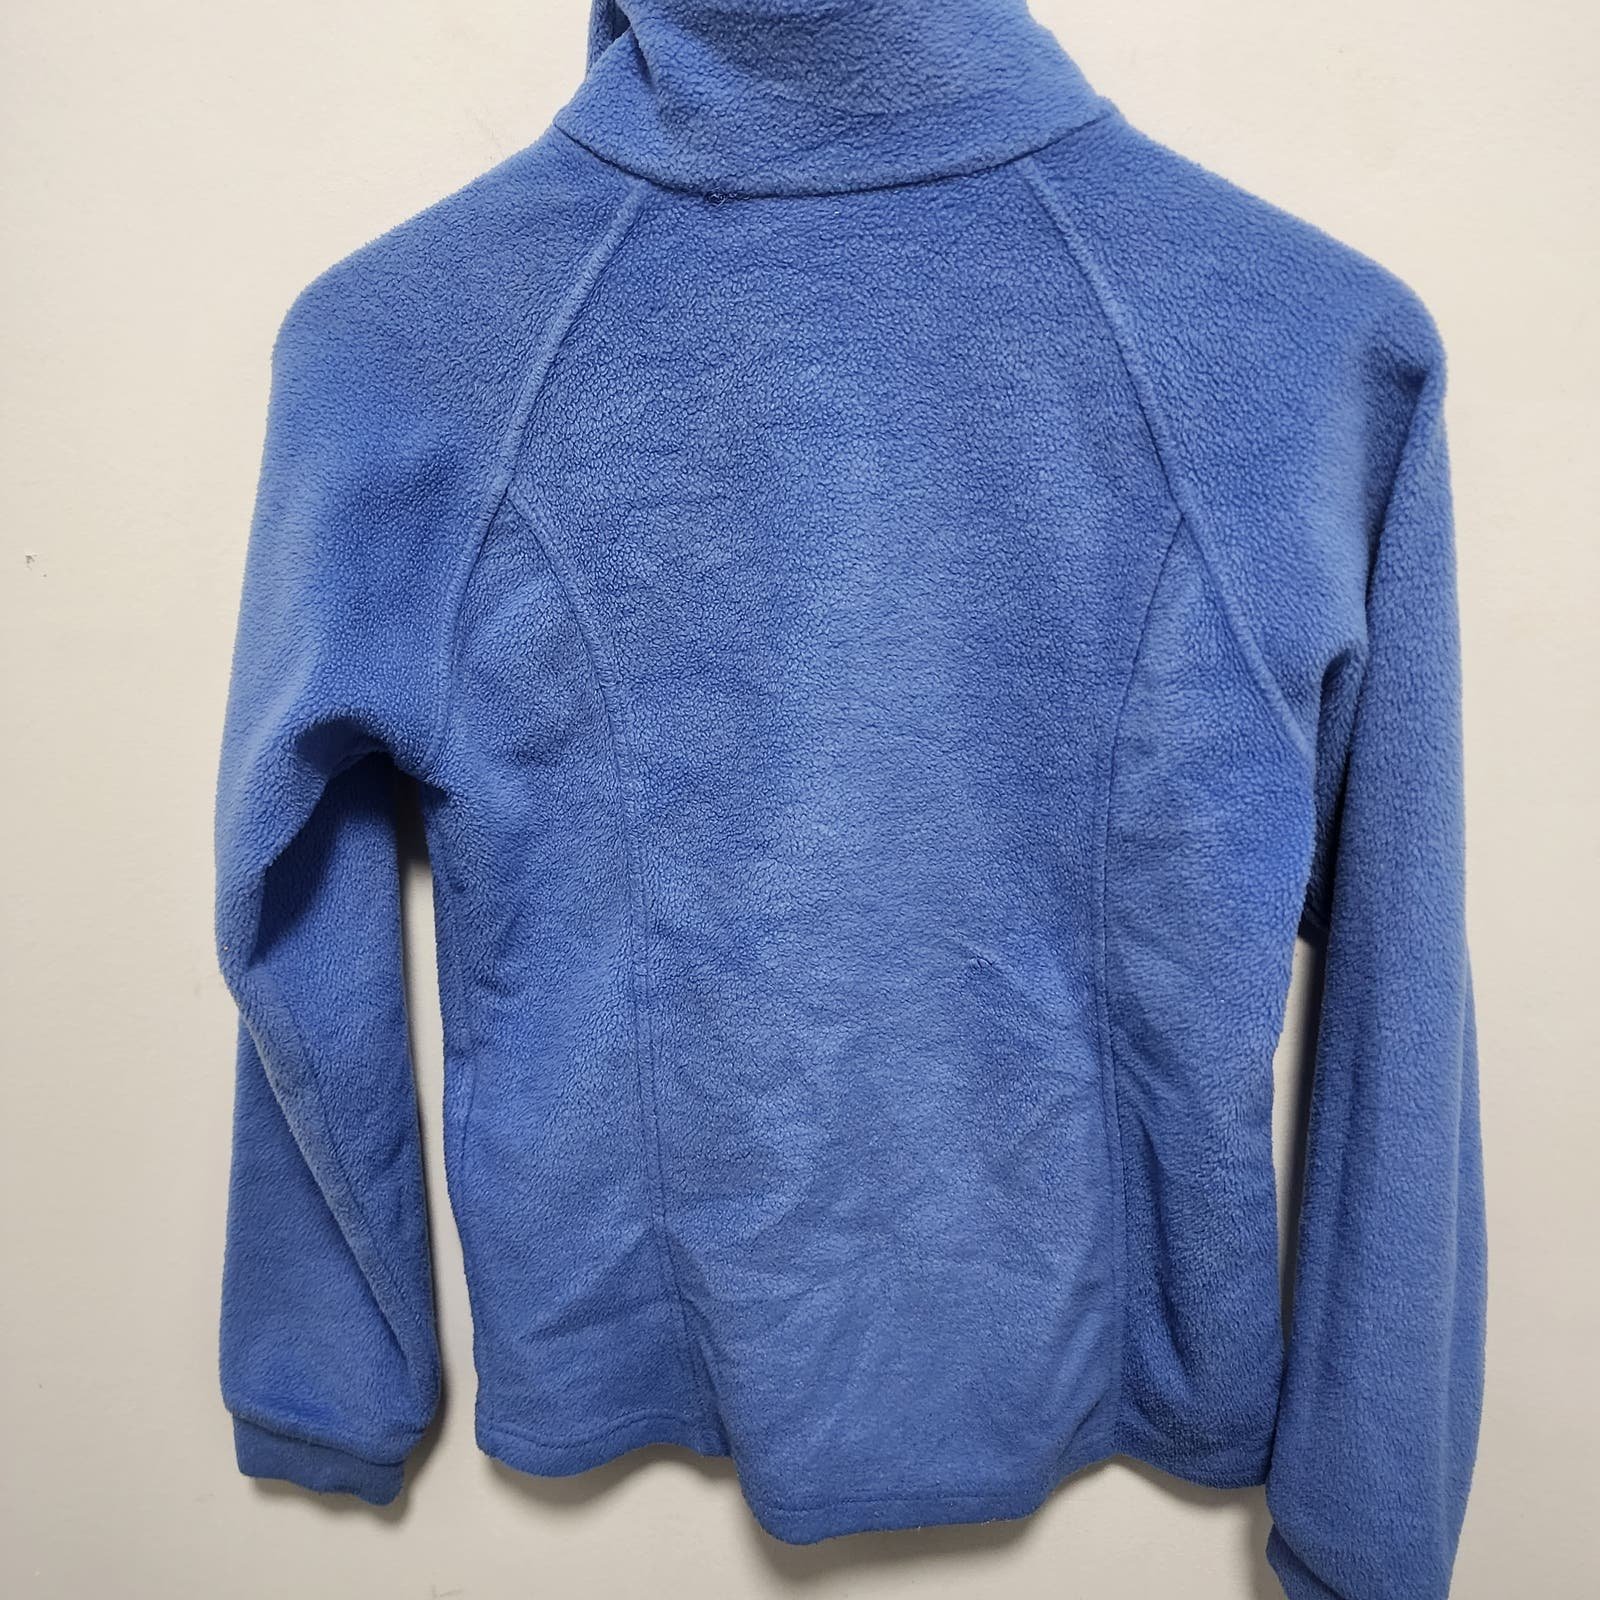 Special offer  Columbia Polar Fleece Jacket Womens 14/16 Blue Full Zip Up Gorpcore Outdoors ppuH38USn all for you